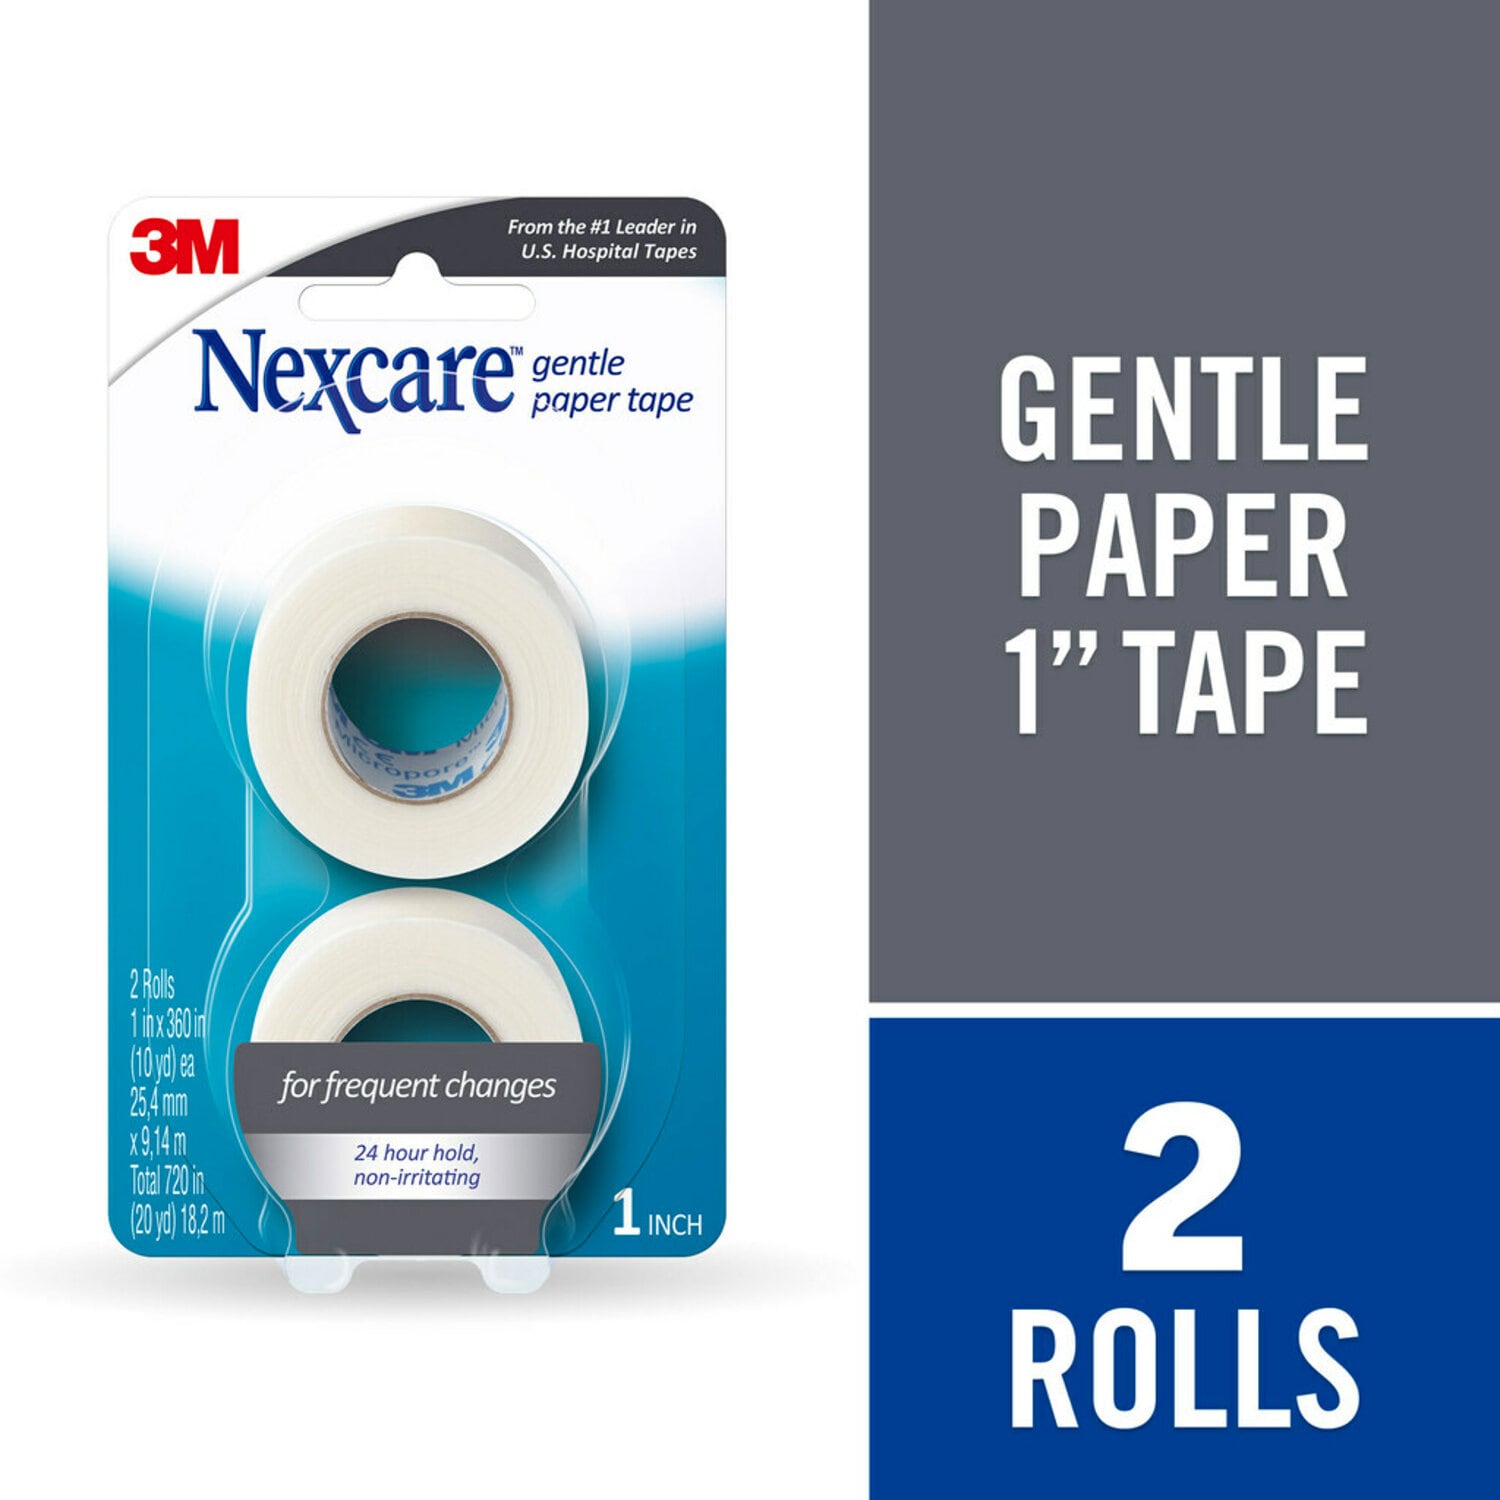 7100187764 - Nexcare Gentle Paper First Aid Tape, 781-2Pk-CA, 1 In X 10 Yds Carded (Carded, 2 Pk)